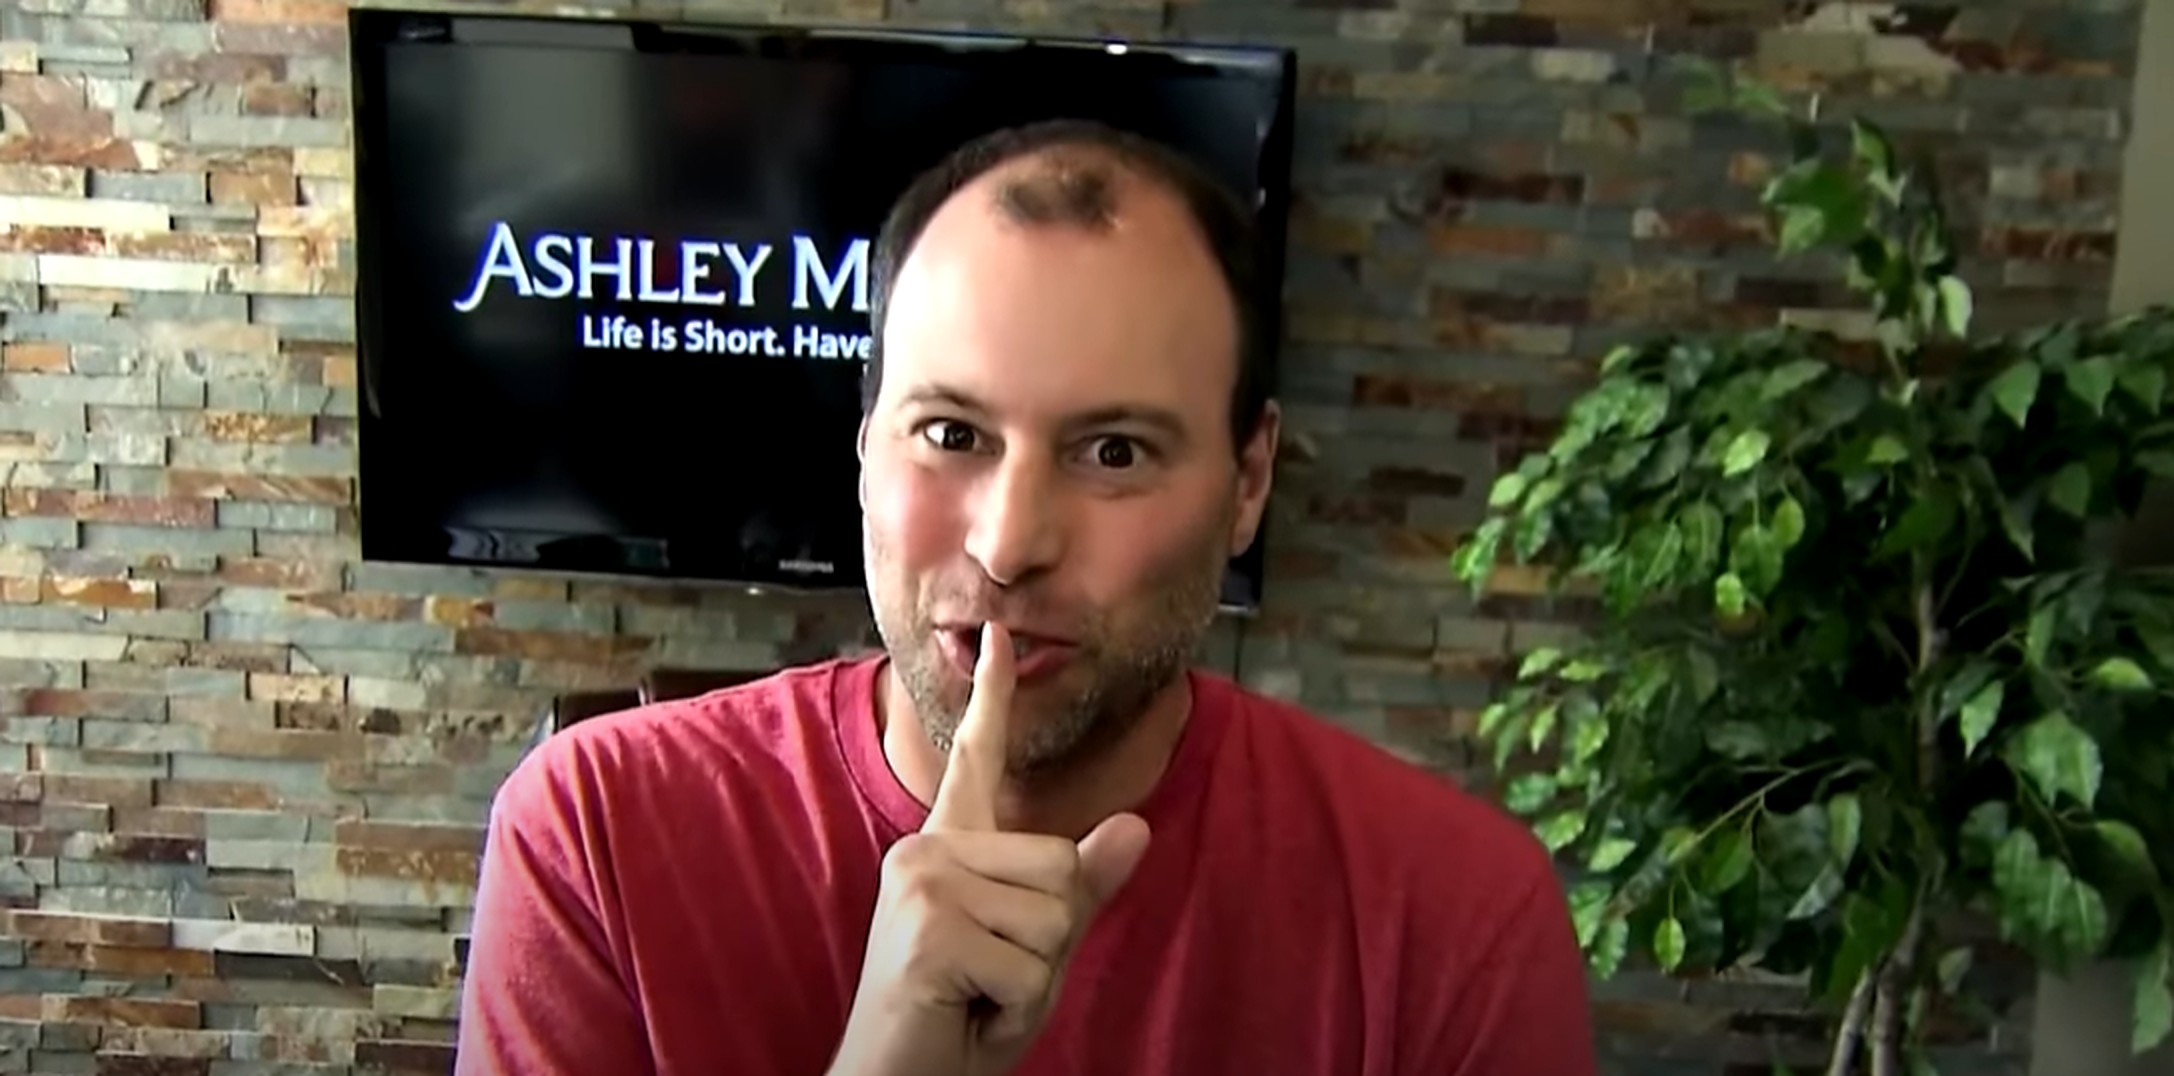 Noel Biderman Where is Ashley Madison's ExCEO Today?